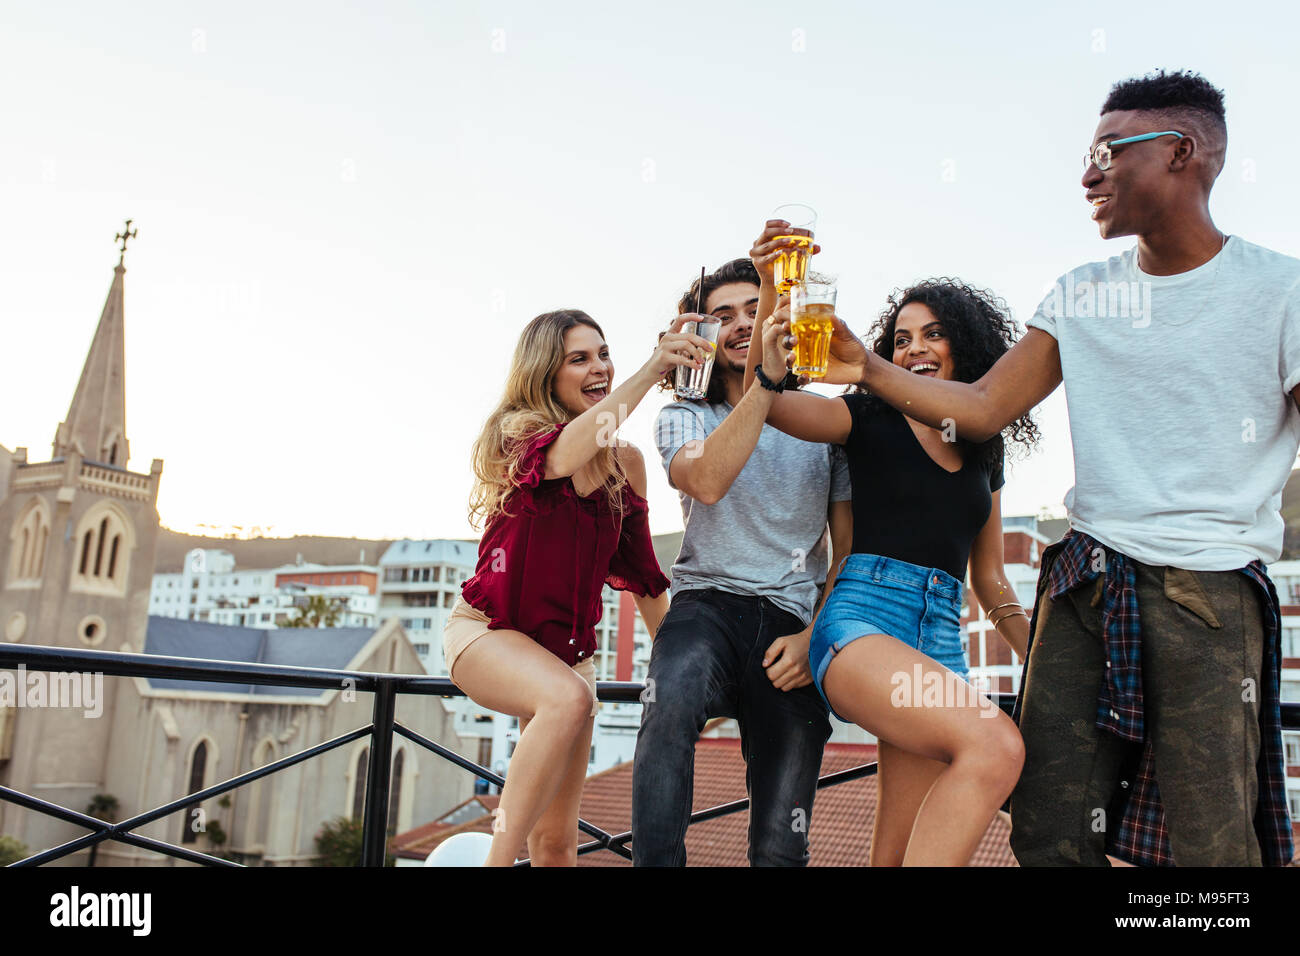 Friends and drinks. Young cheerful people cheering with beer and smiling on rooftop party. Men and women toasting drinks on terrace. Stock Photo